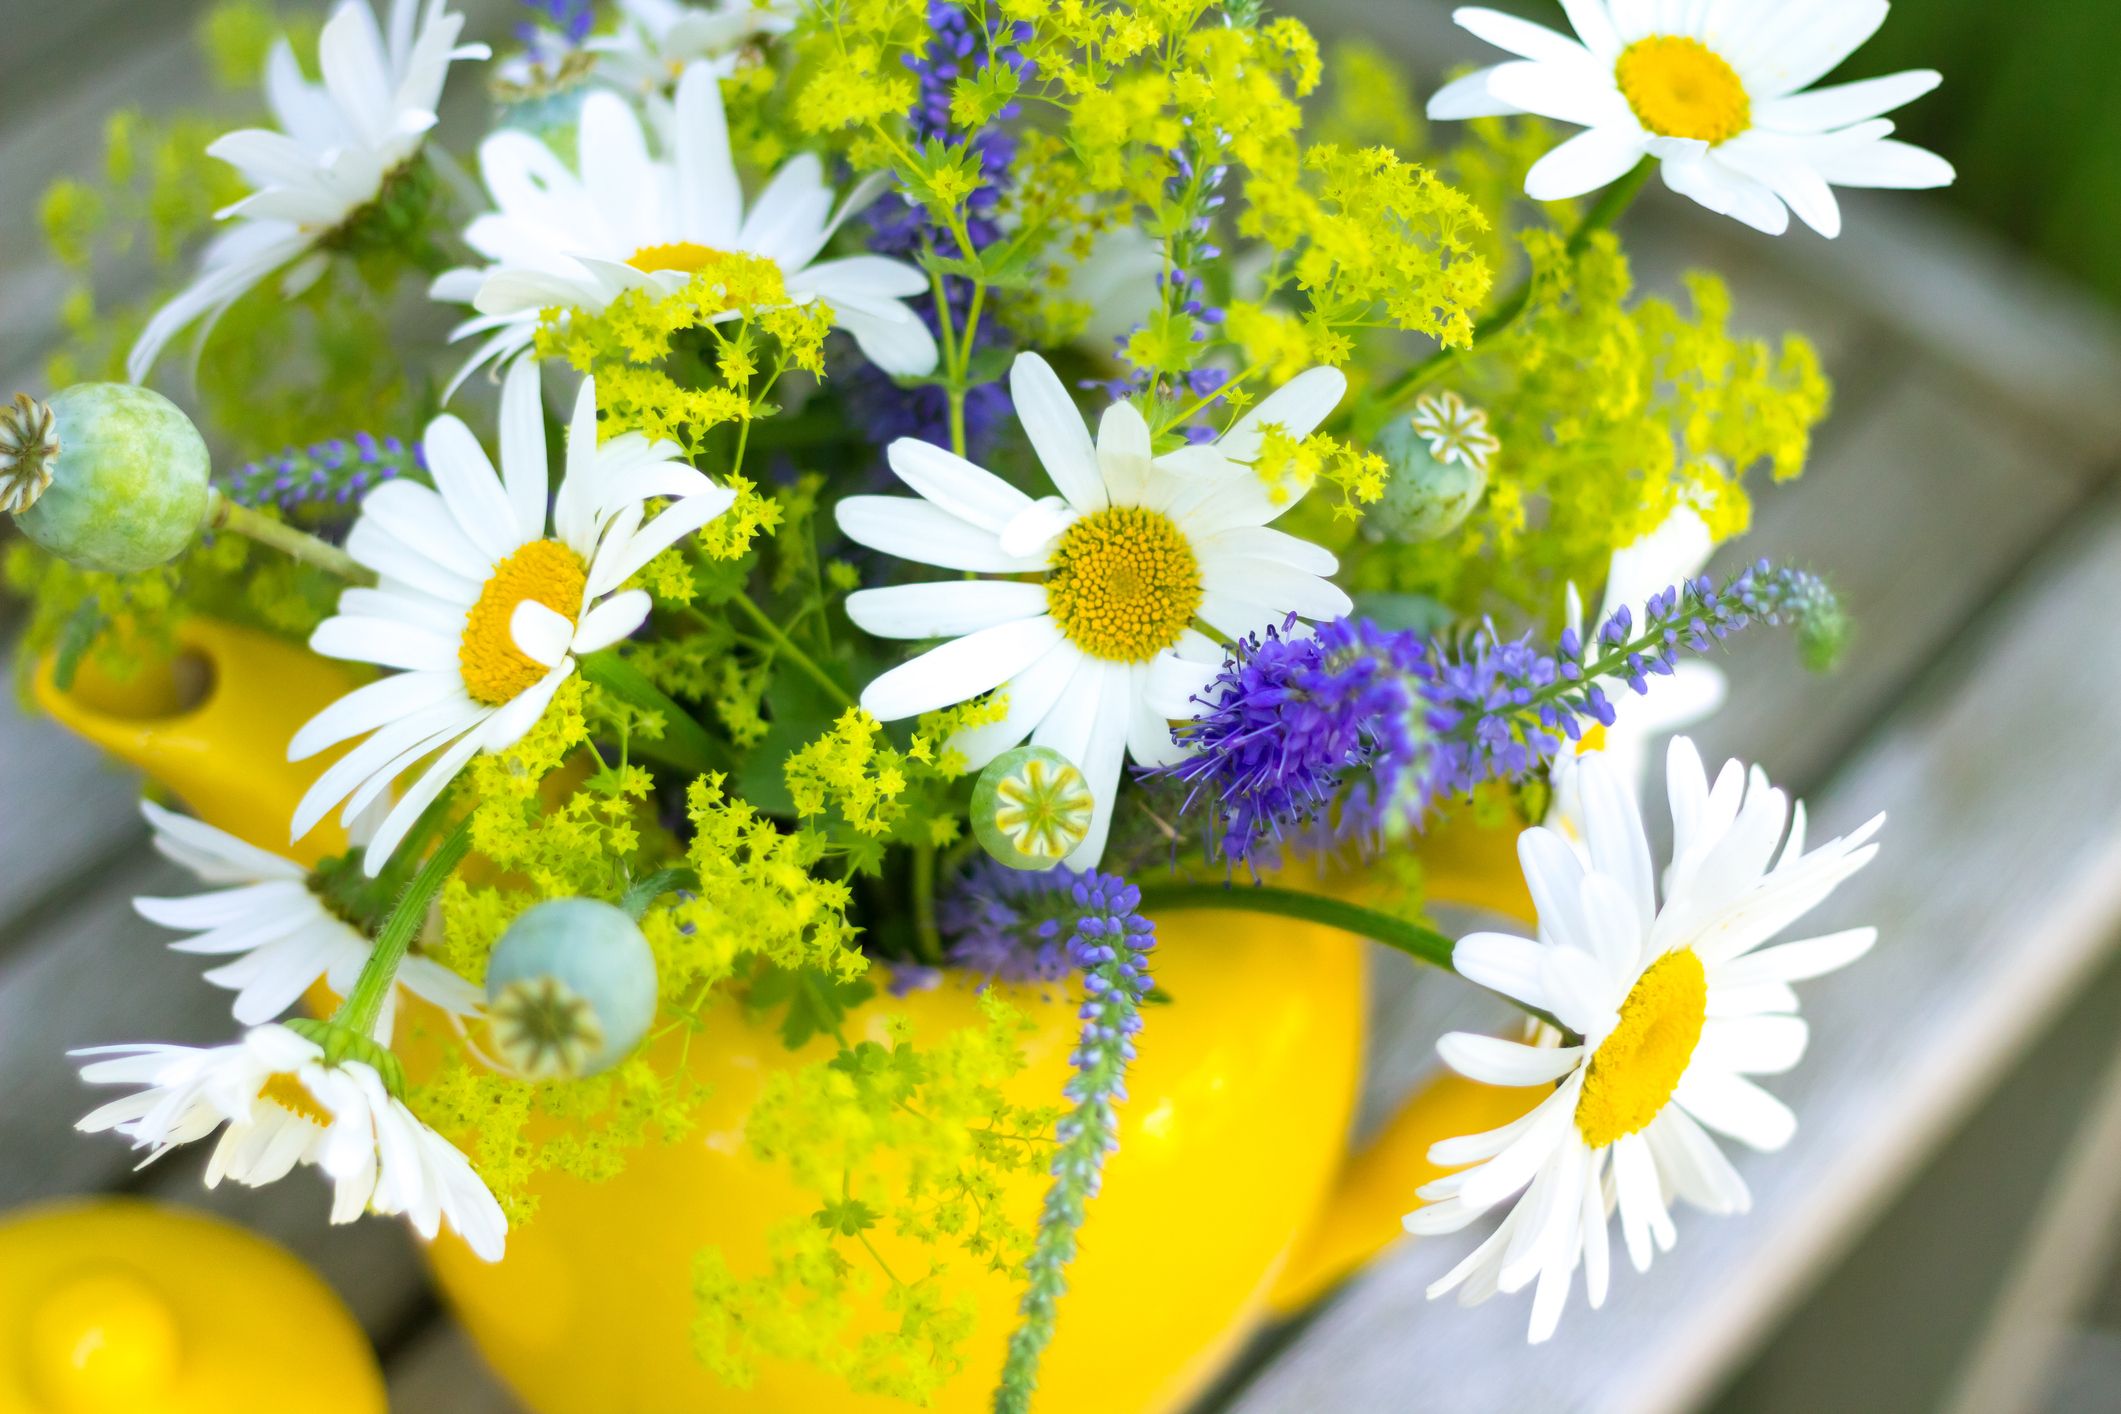 https://hips.hearstapps.com/hmg-prod/images/summer-flower-arrangement-with-daisies-royalty-free-image-465646559-1566892132.jpg